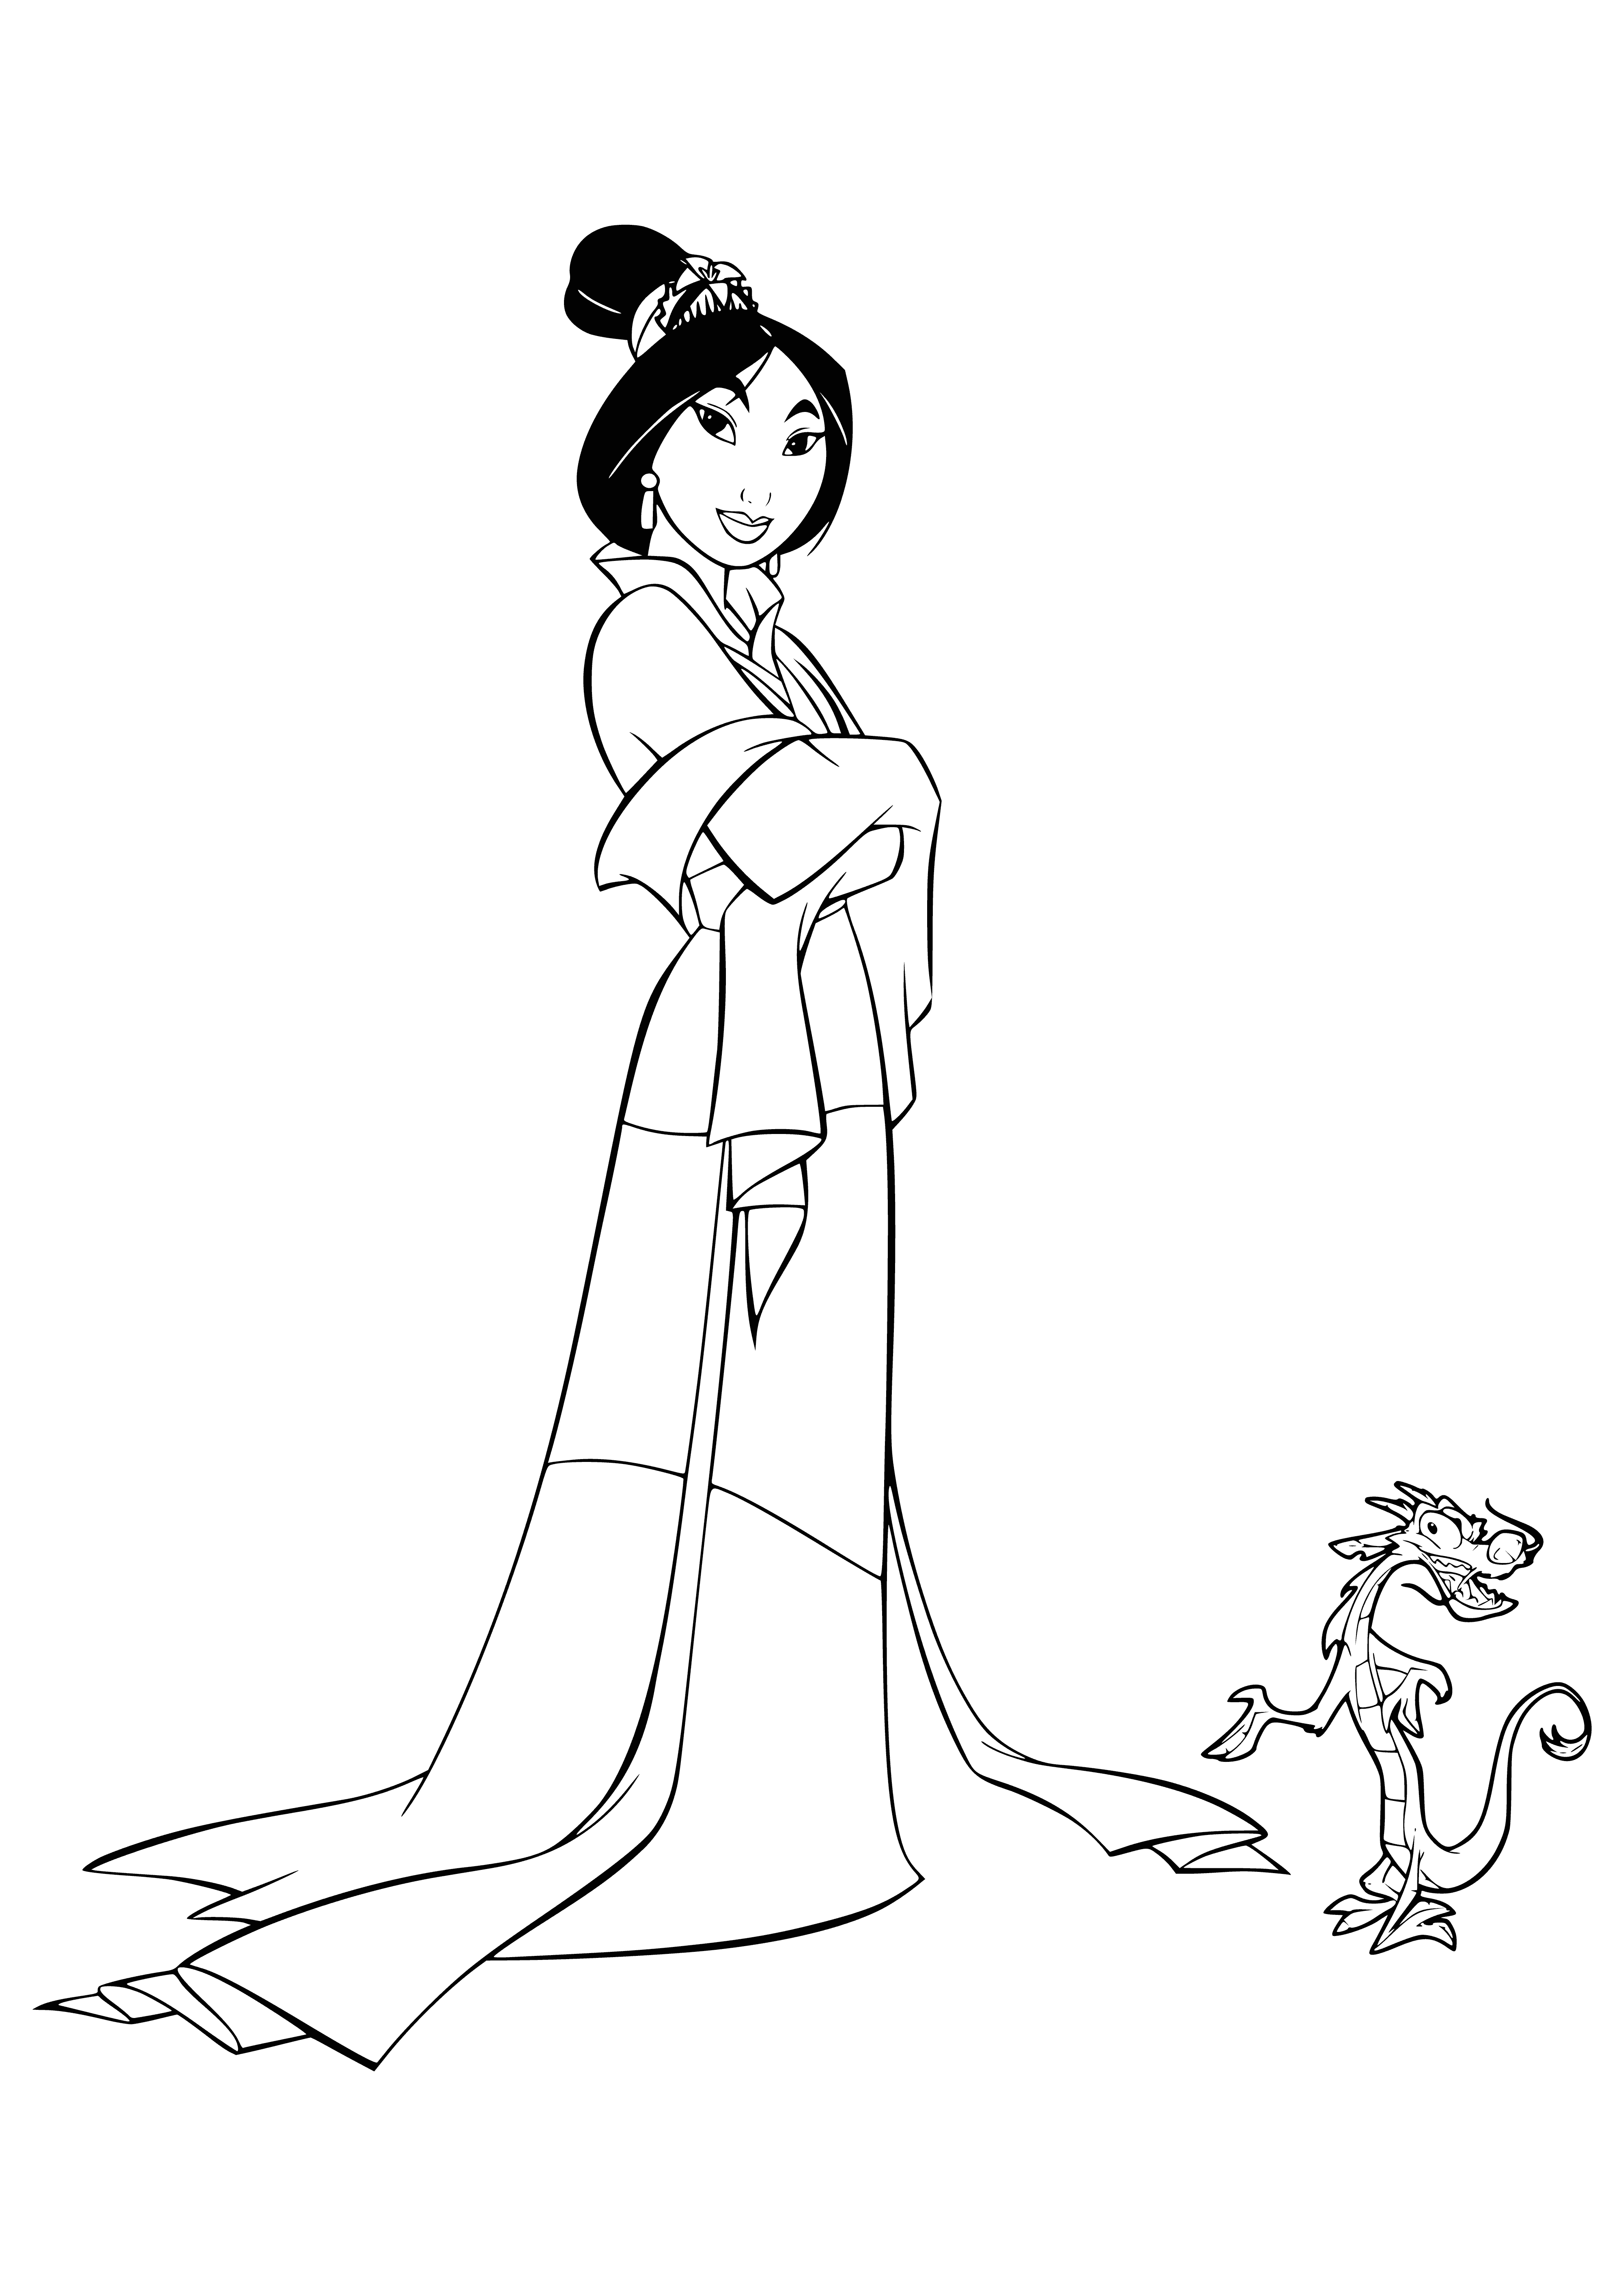 Mulan and the little dragon Mushu coloring page